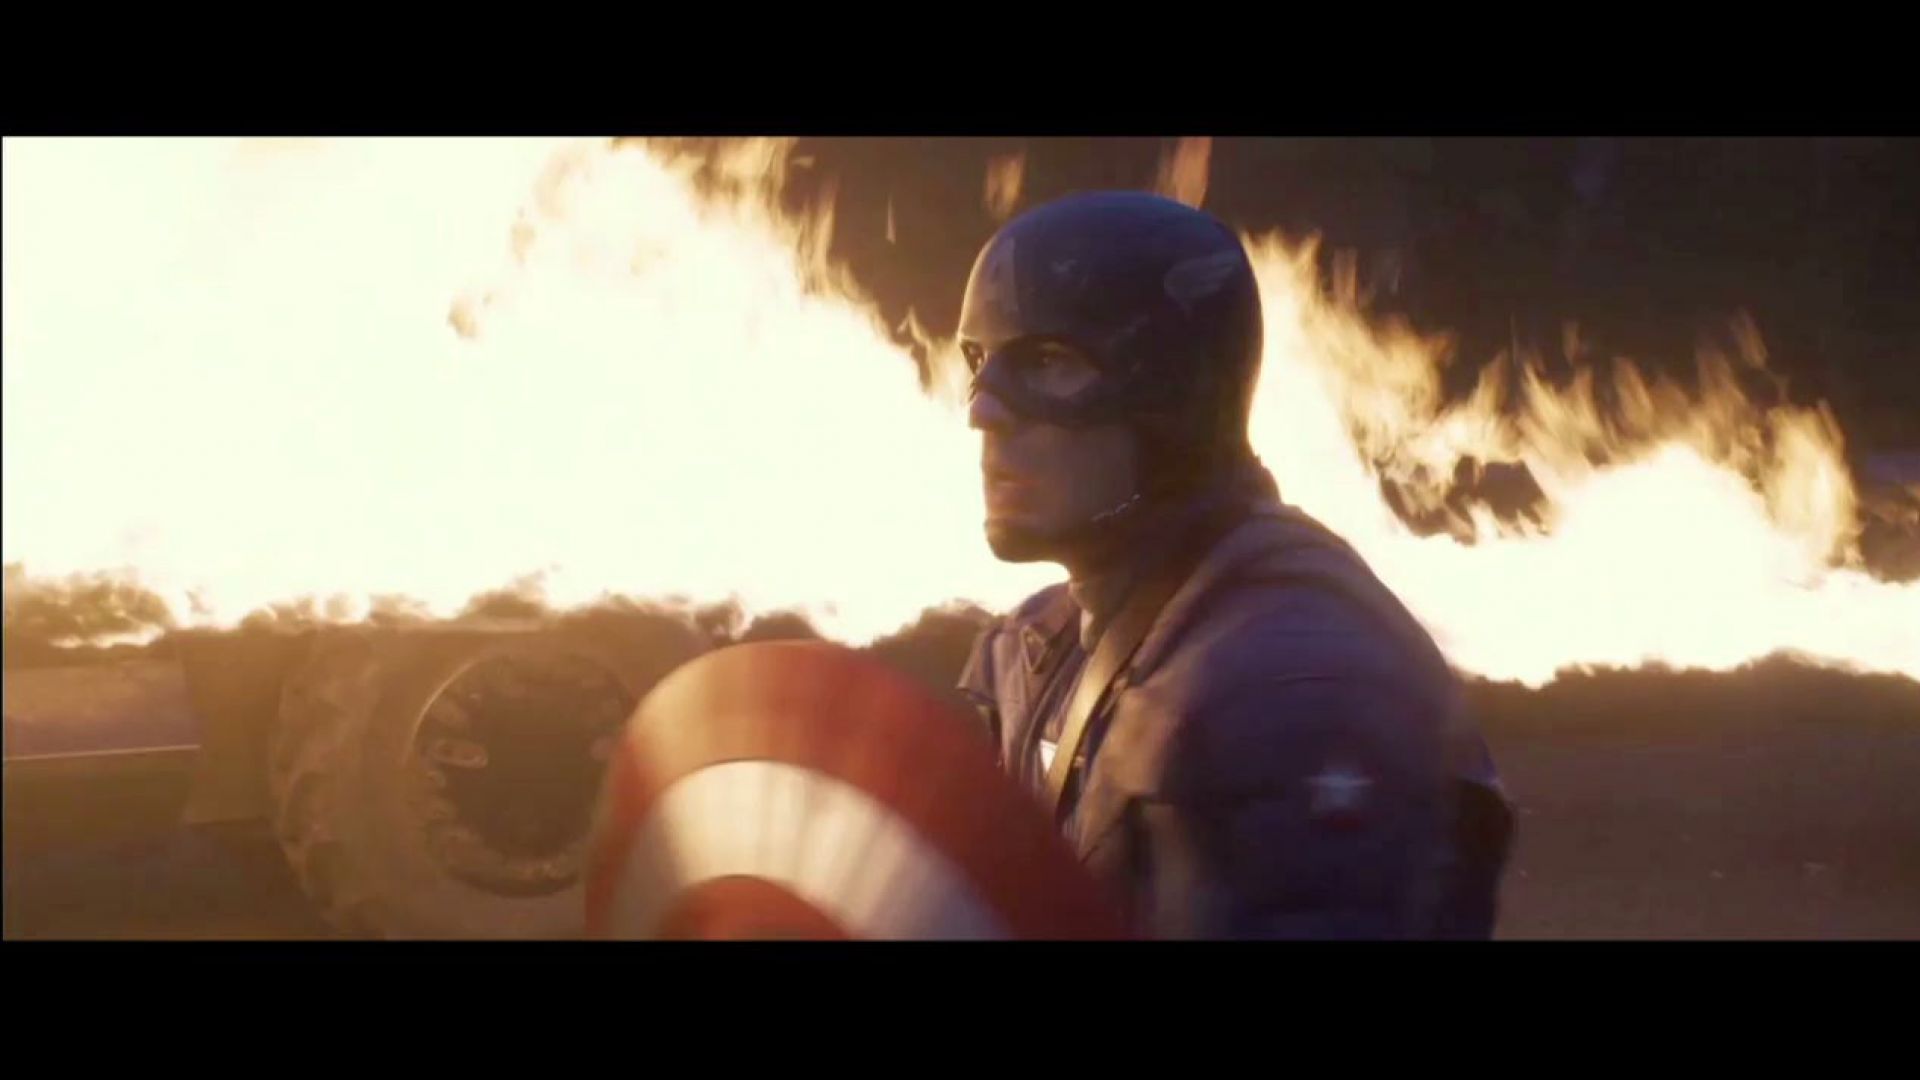 Captain America trapped by flamethrowers